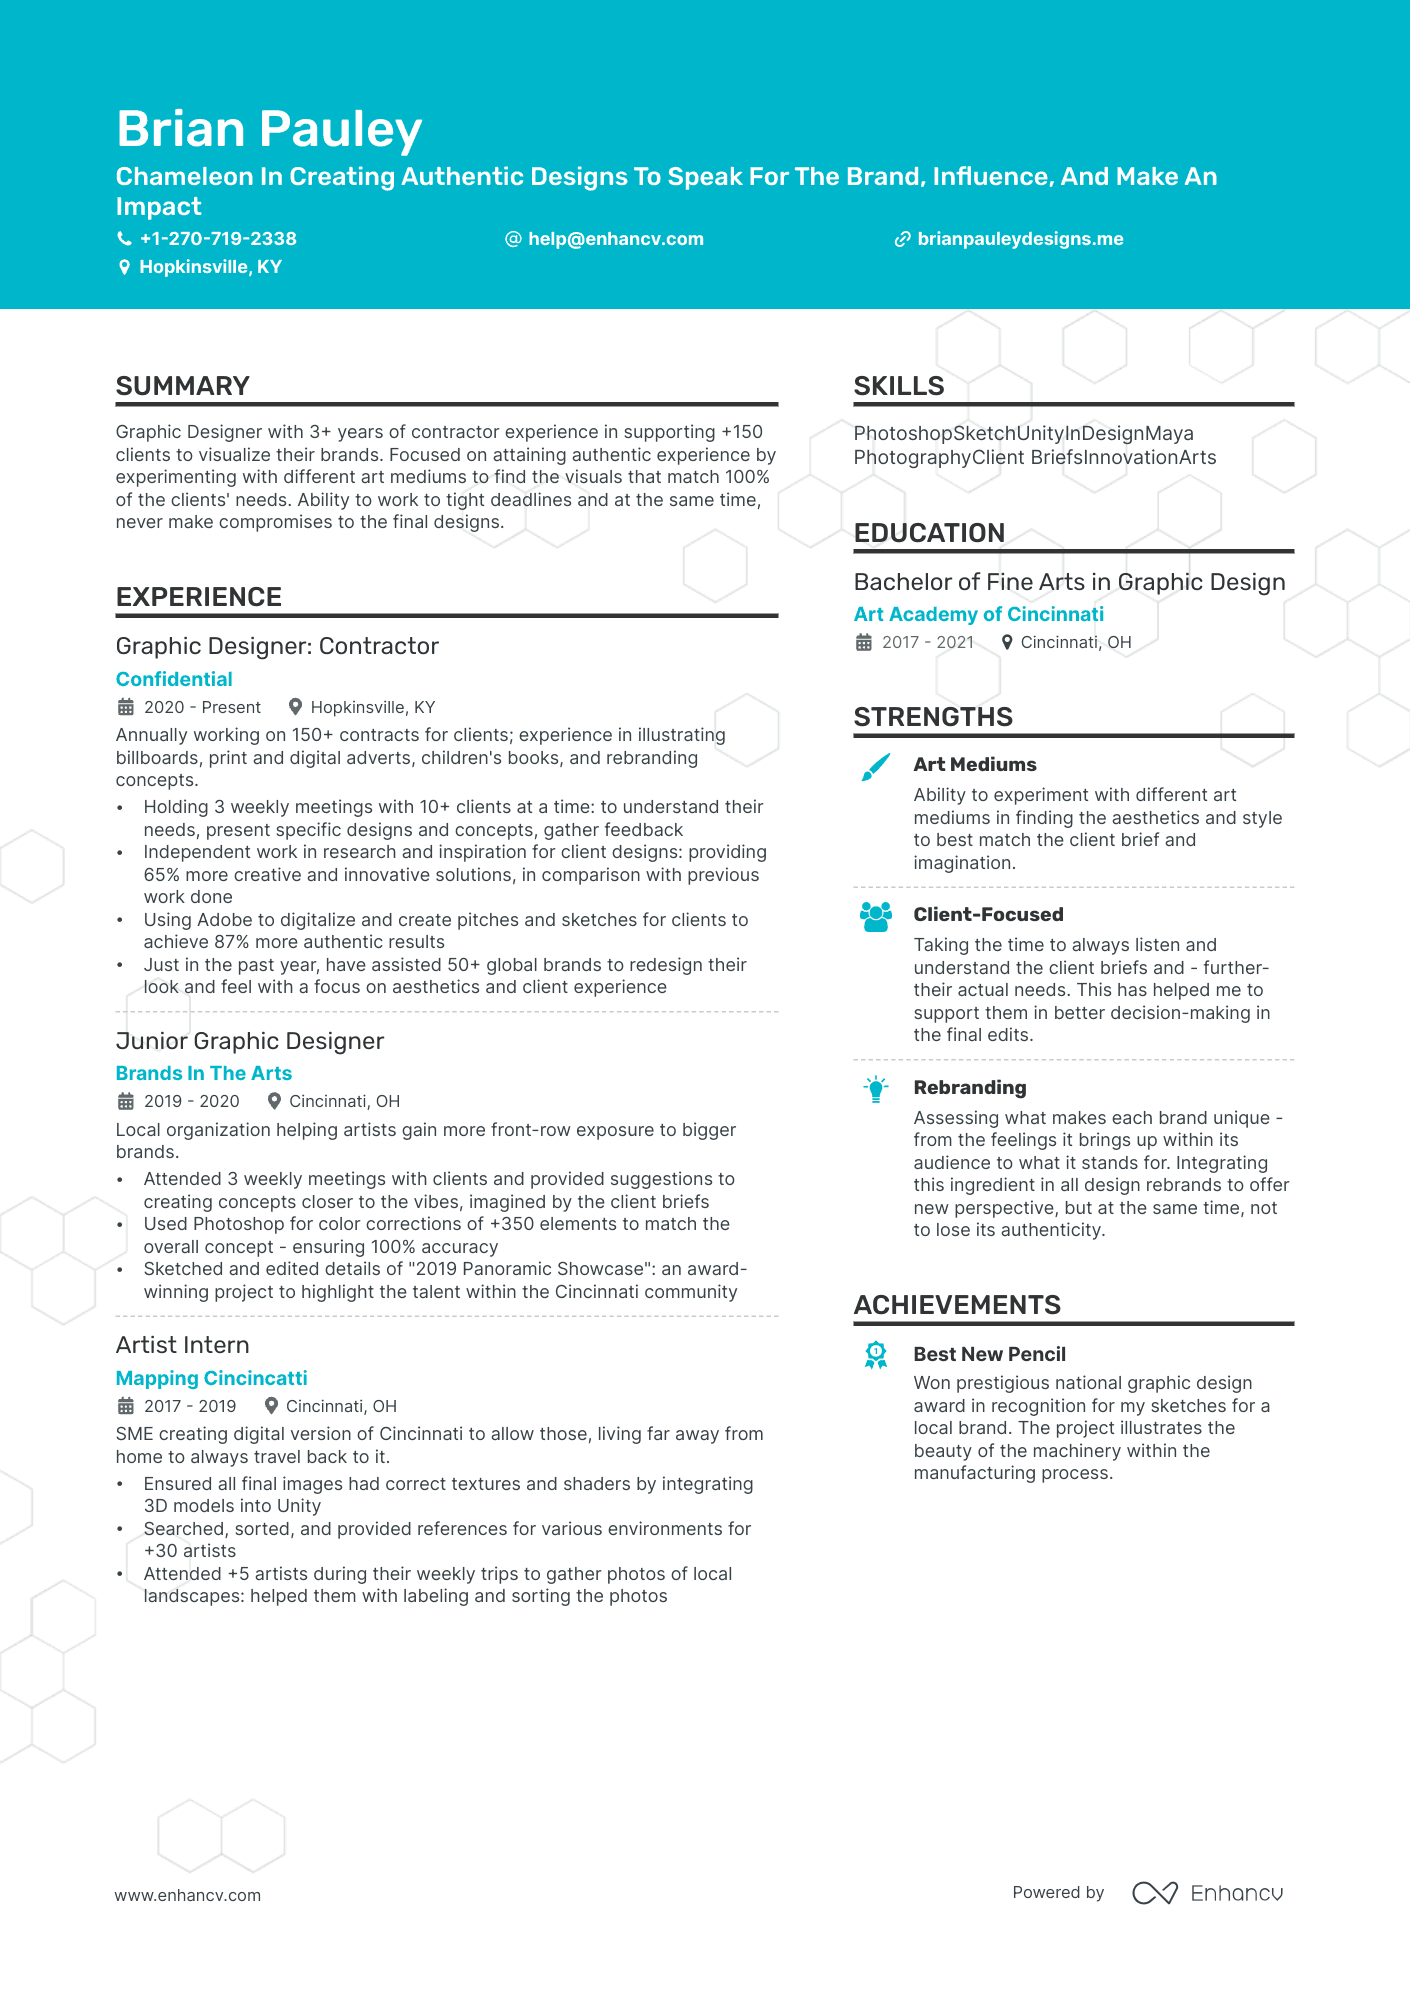 Chameleon In Creating Authentic Designs To Speak For The Brand, Influence, And Make An Impact resume example